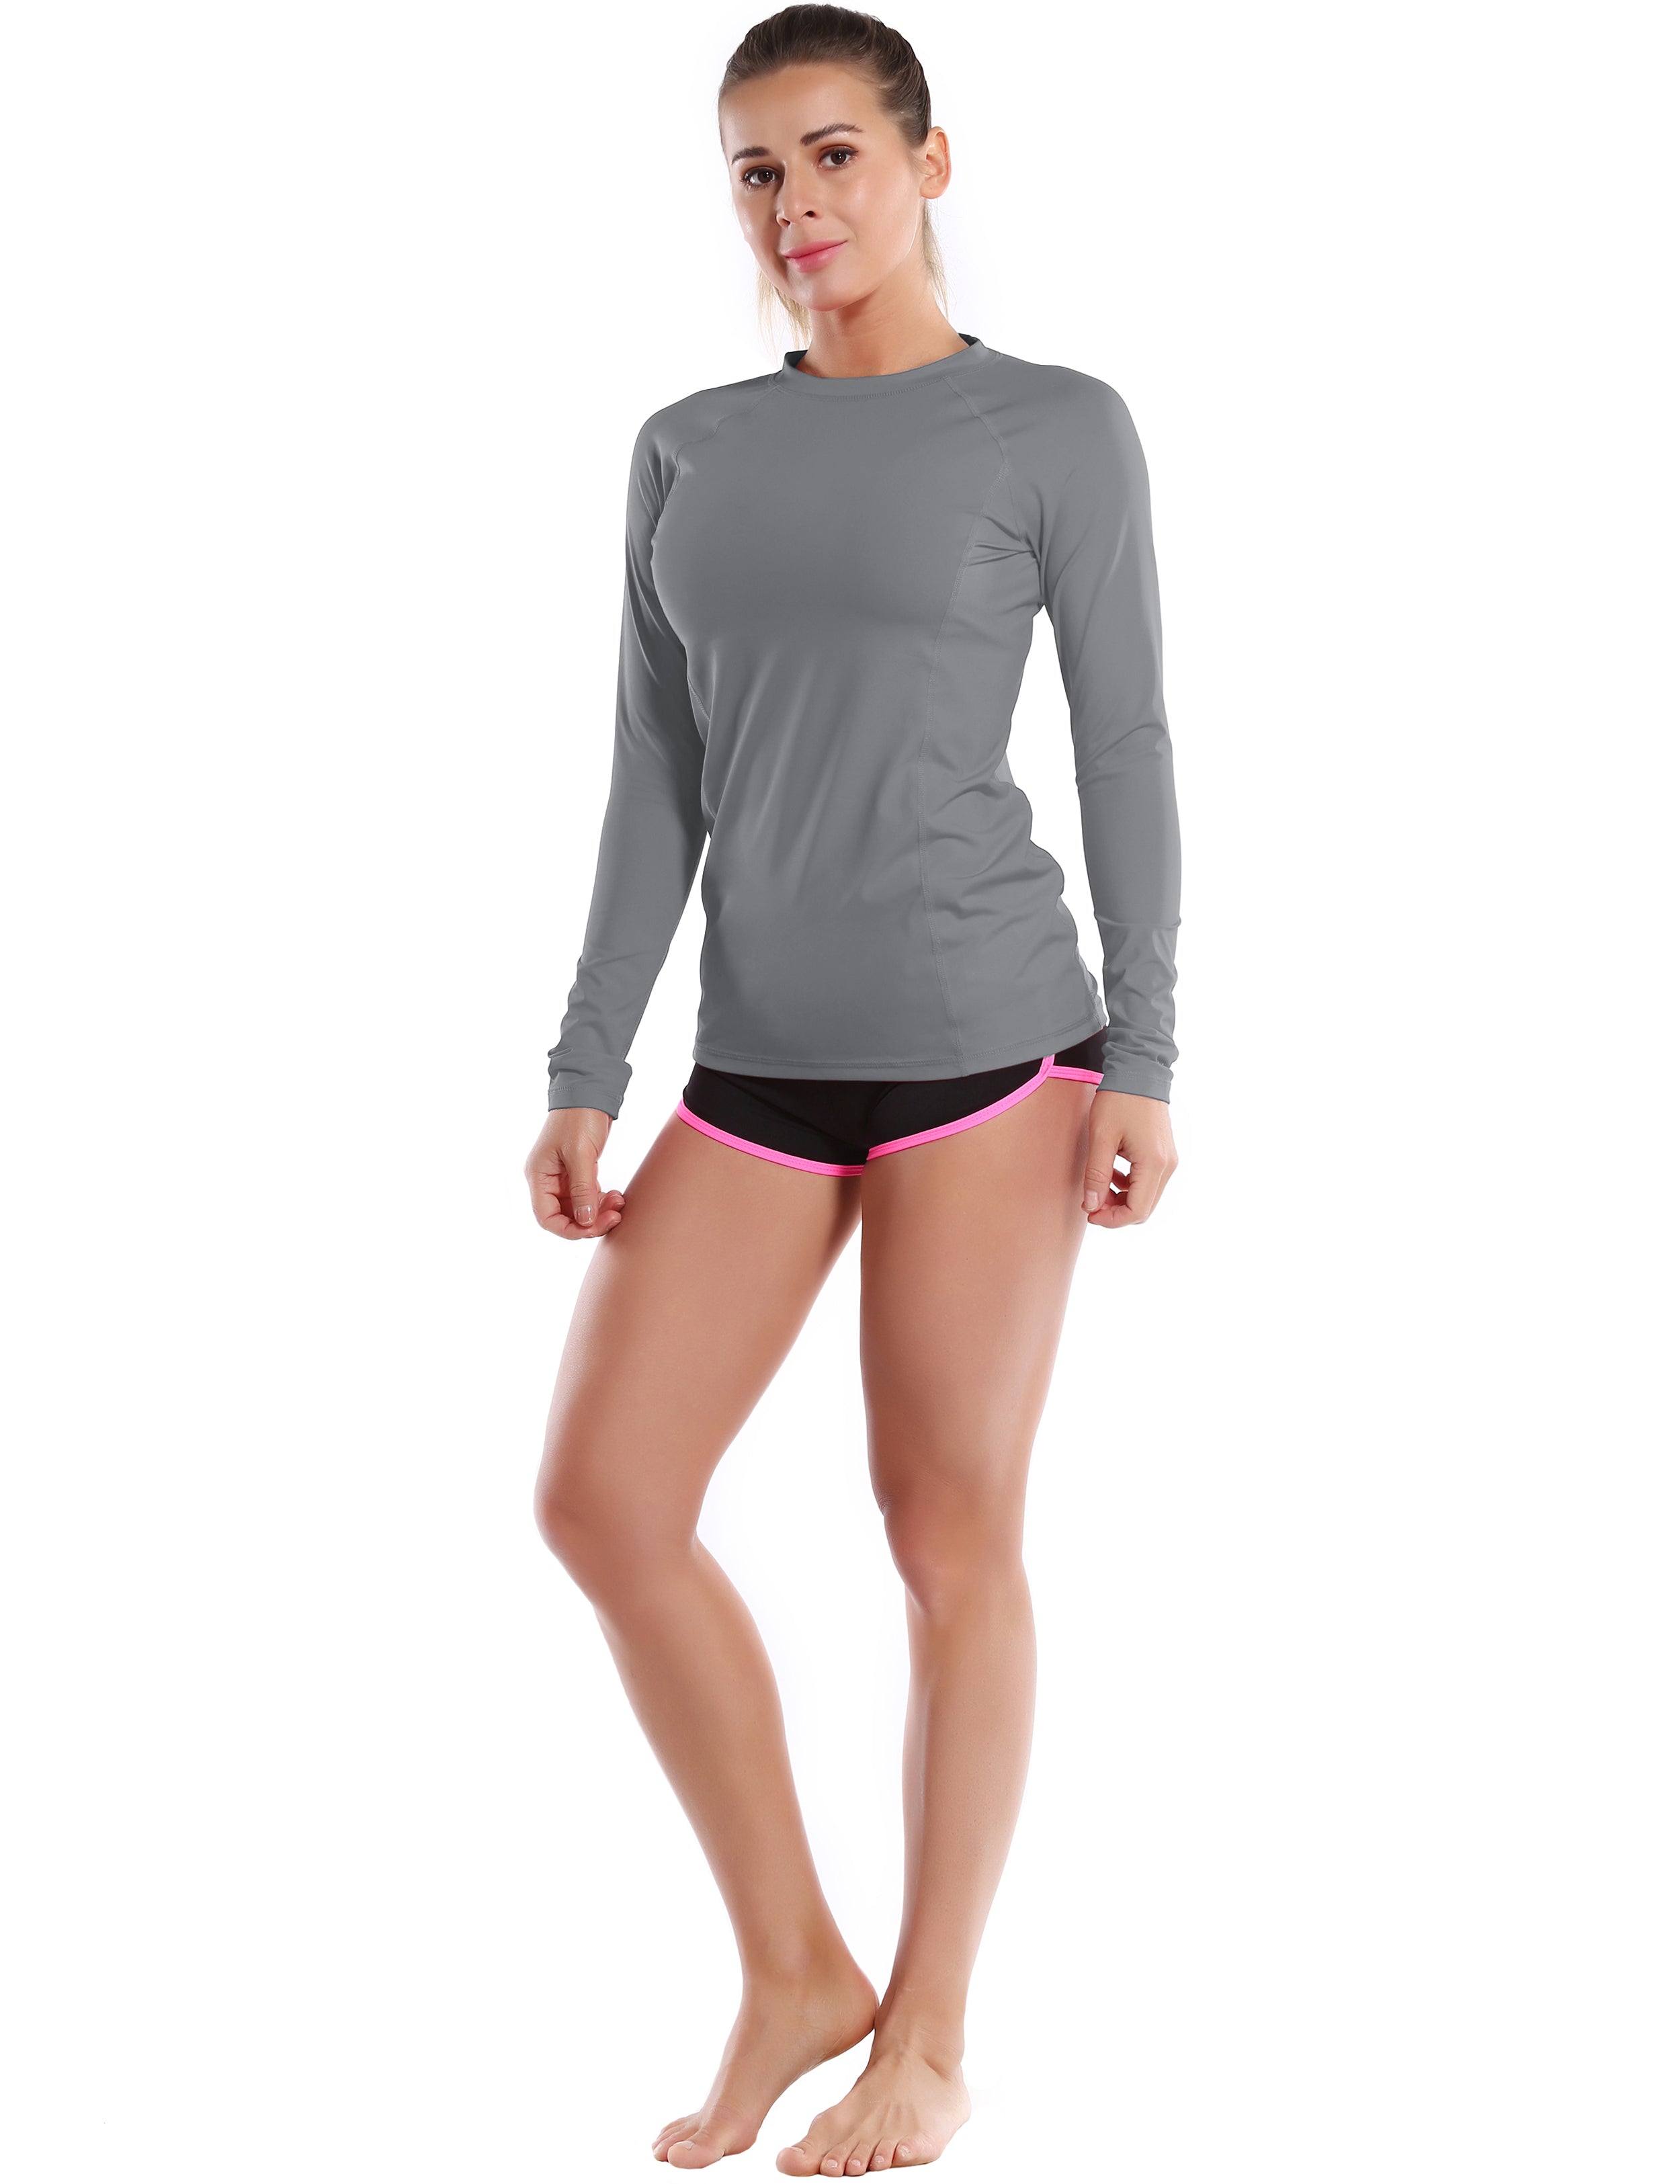 Long Sleeve UPF 50+ Rashguard gray 84%Polyester/16%Spandex Fitted design Dries ultra-fast UV Protection: UPF 50 sun protection